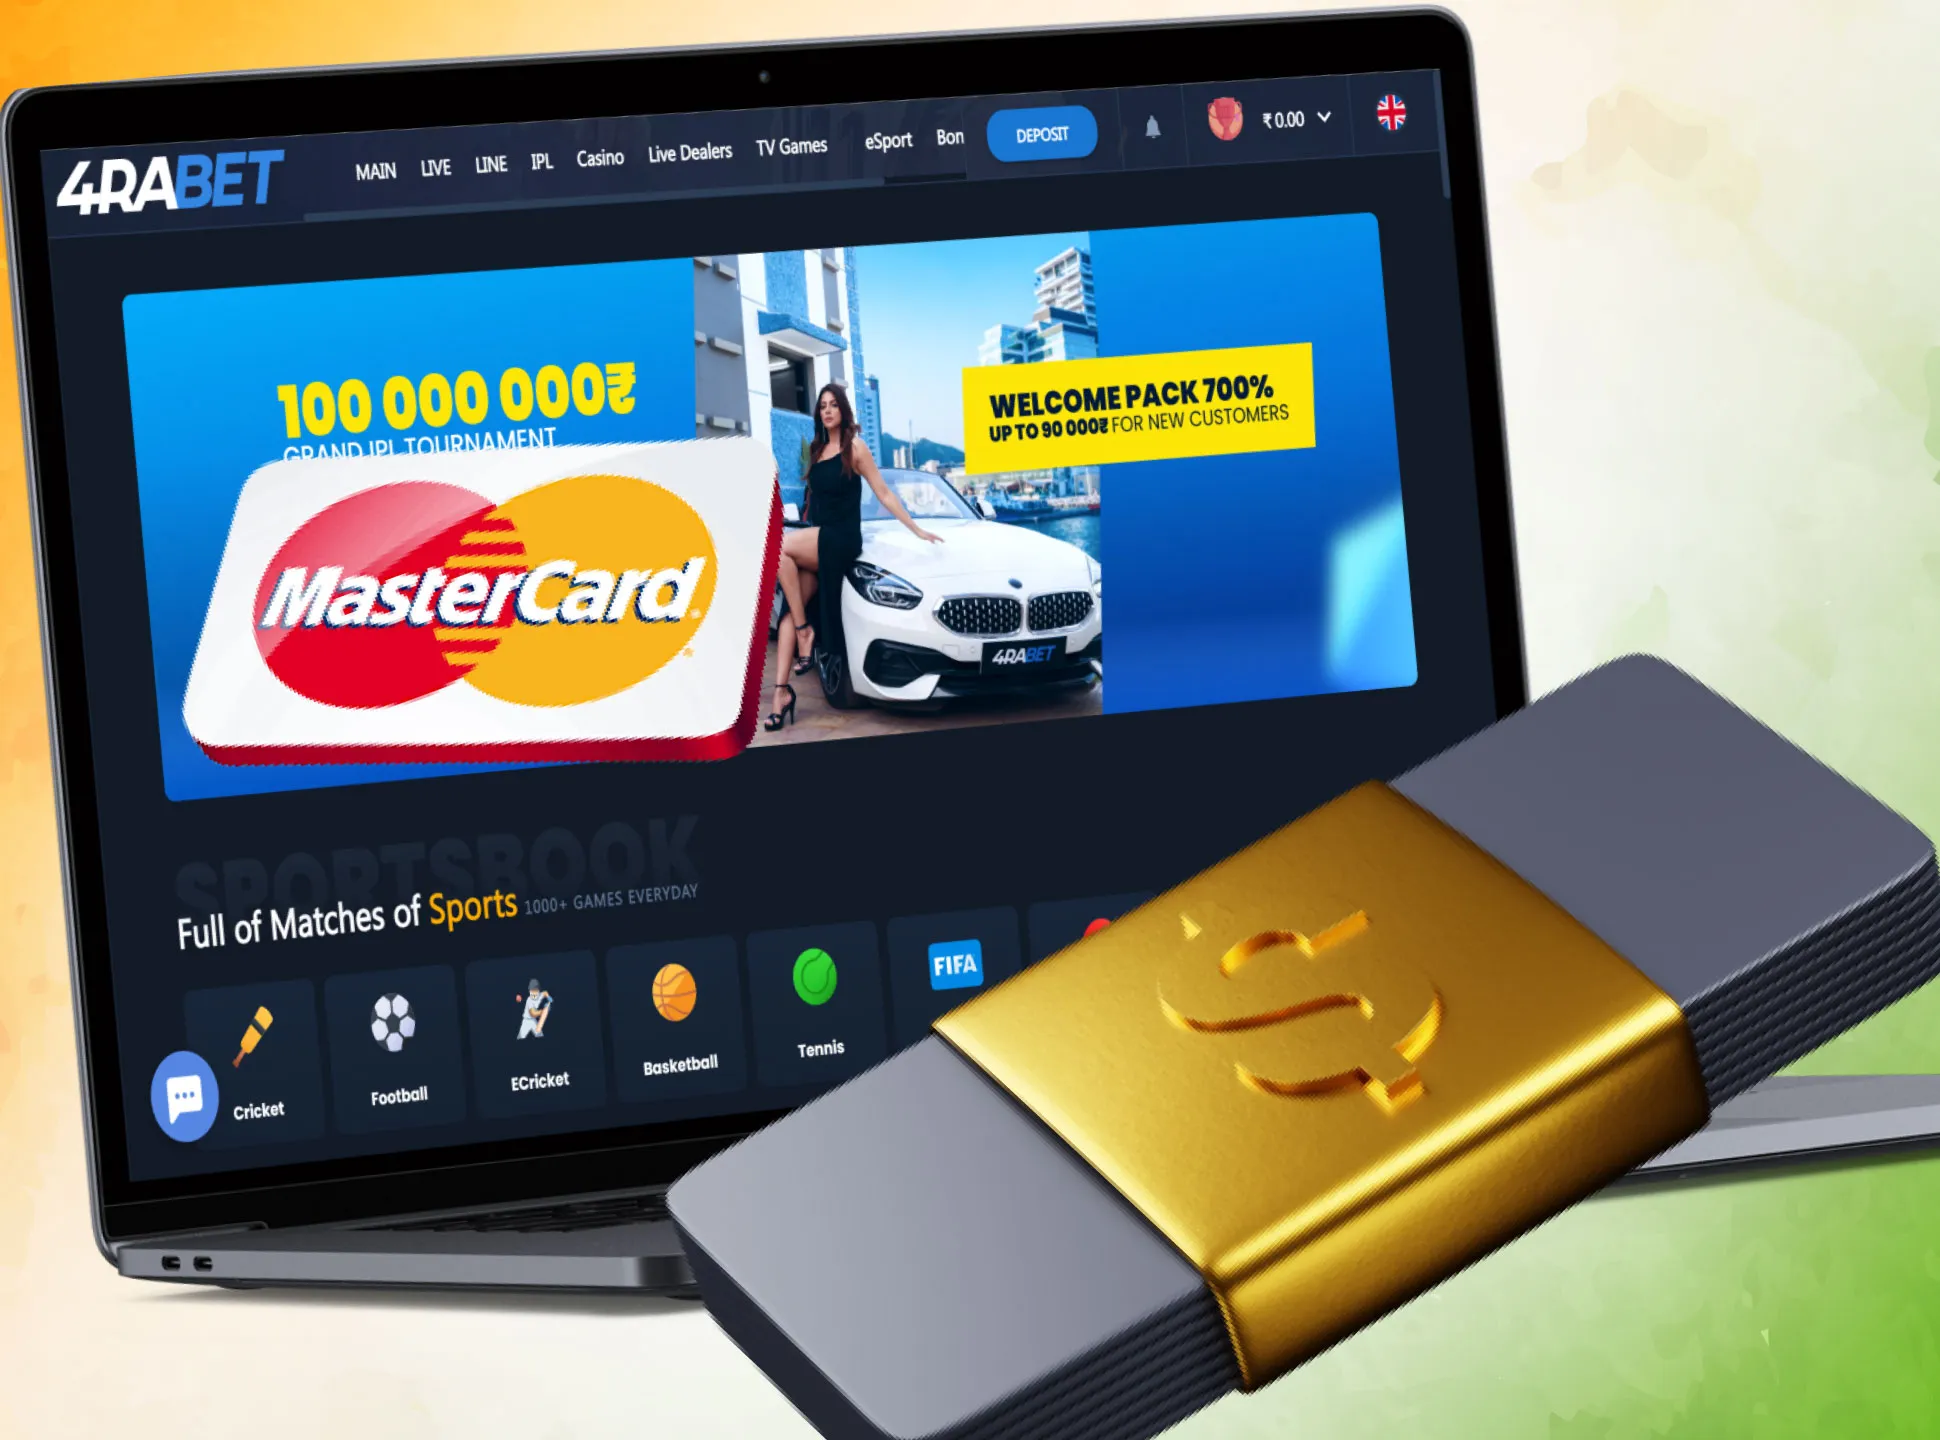 You can easily find Mastercard among the payment methods of many bookmakers.